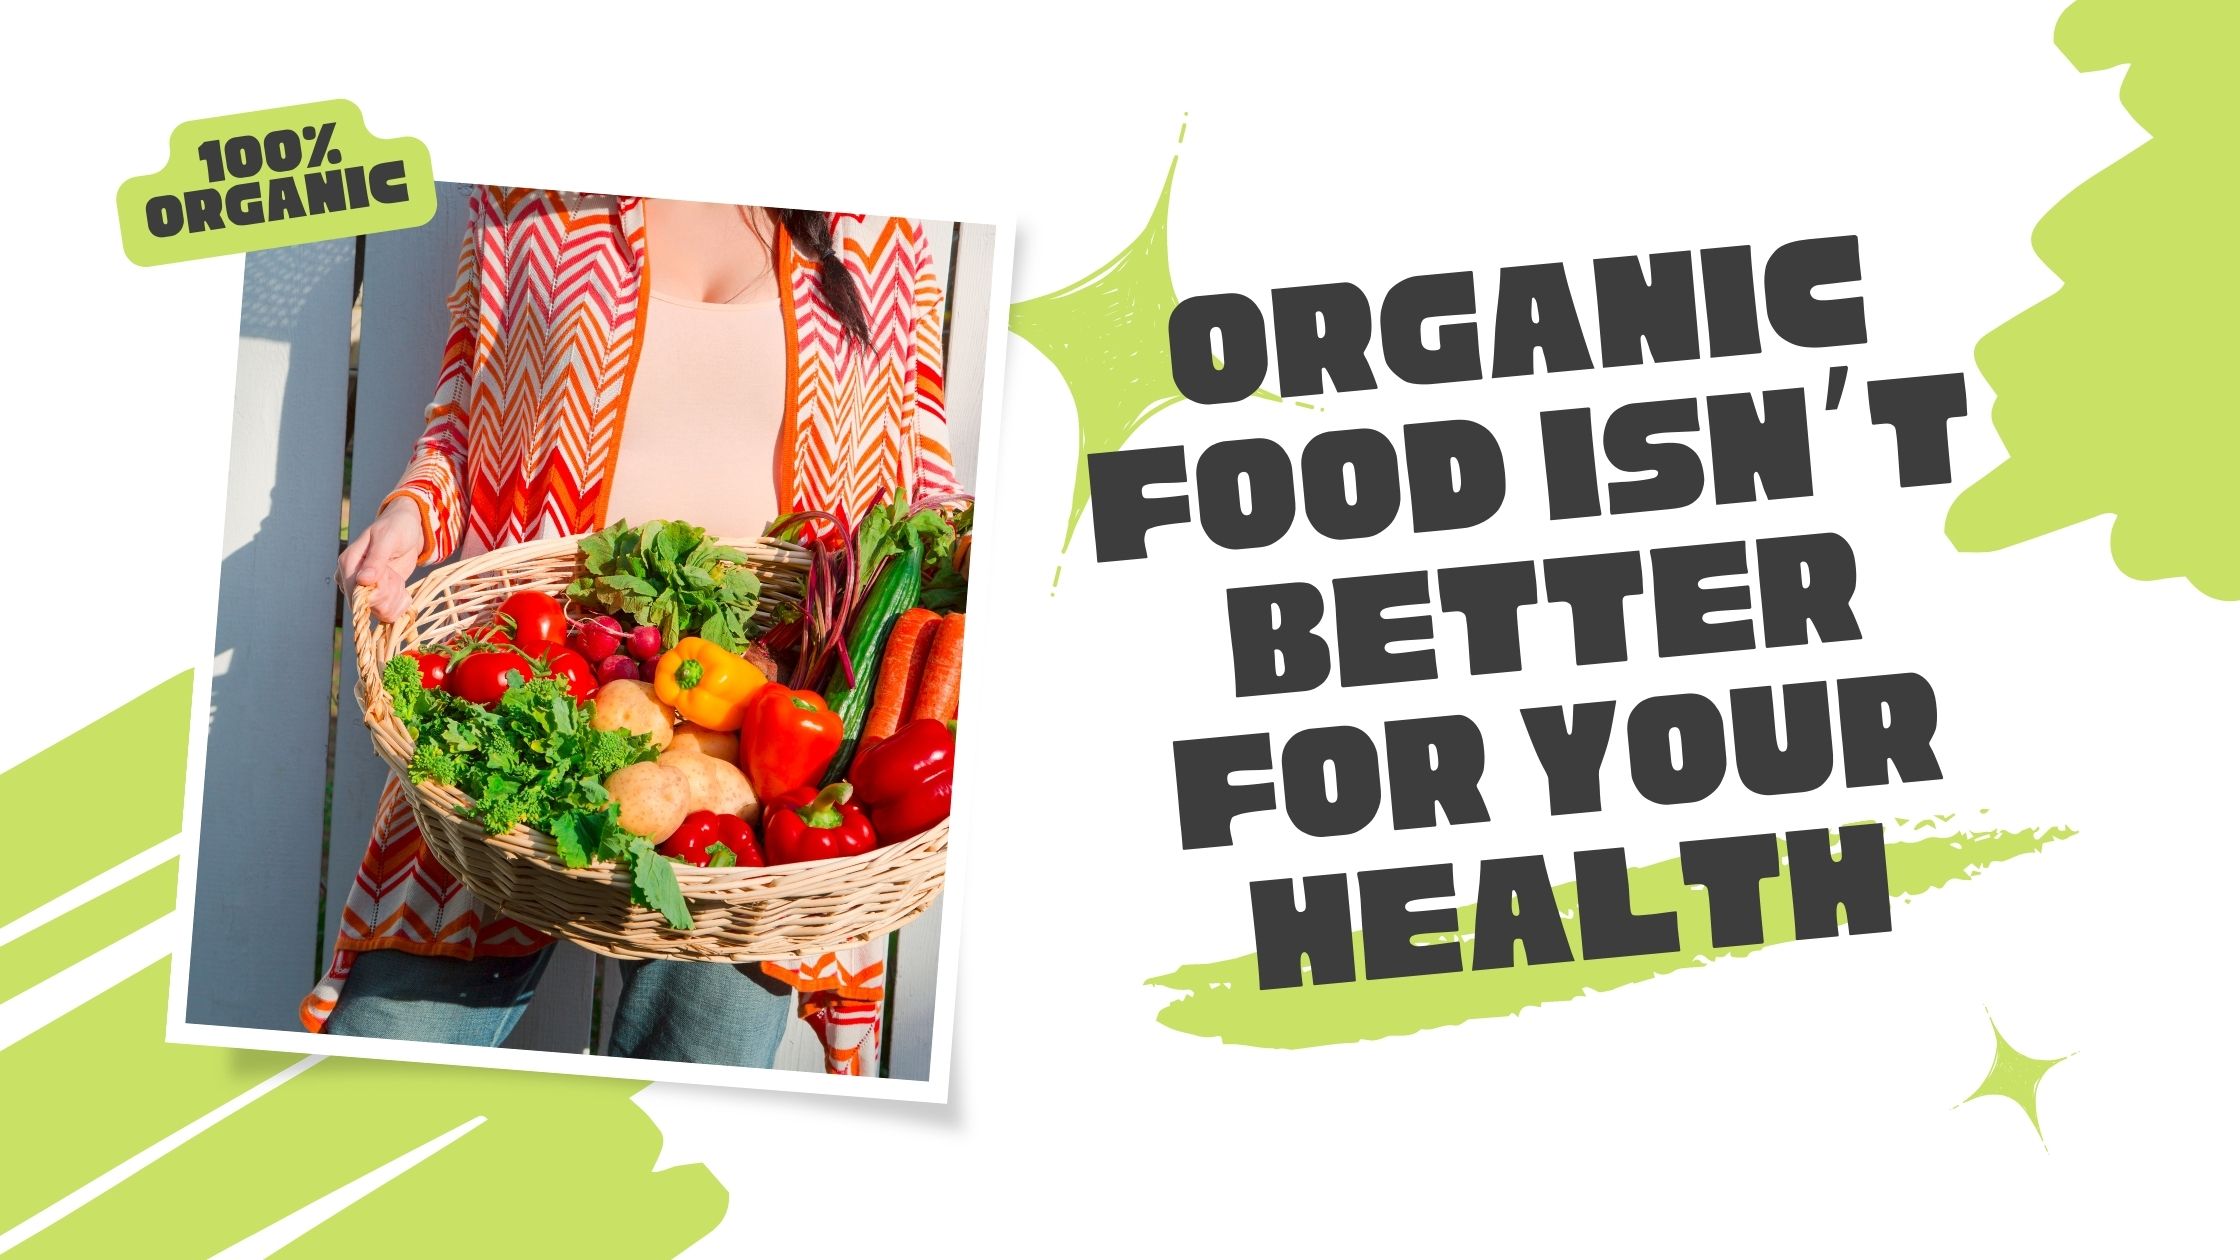 Organic food isn’t better for your health